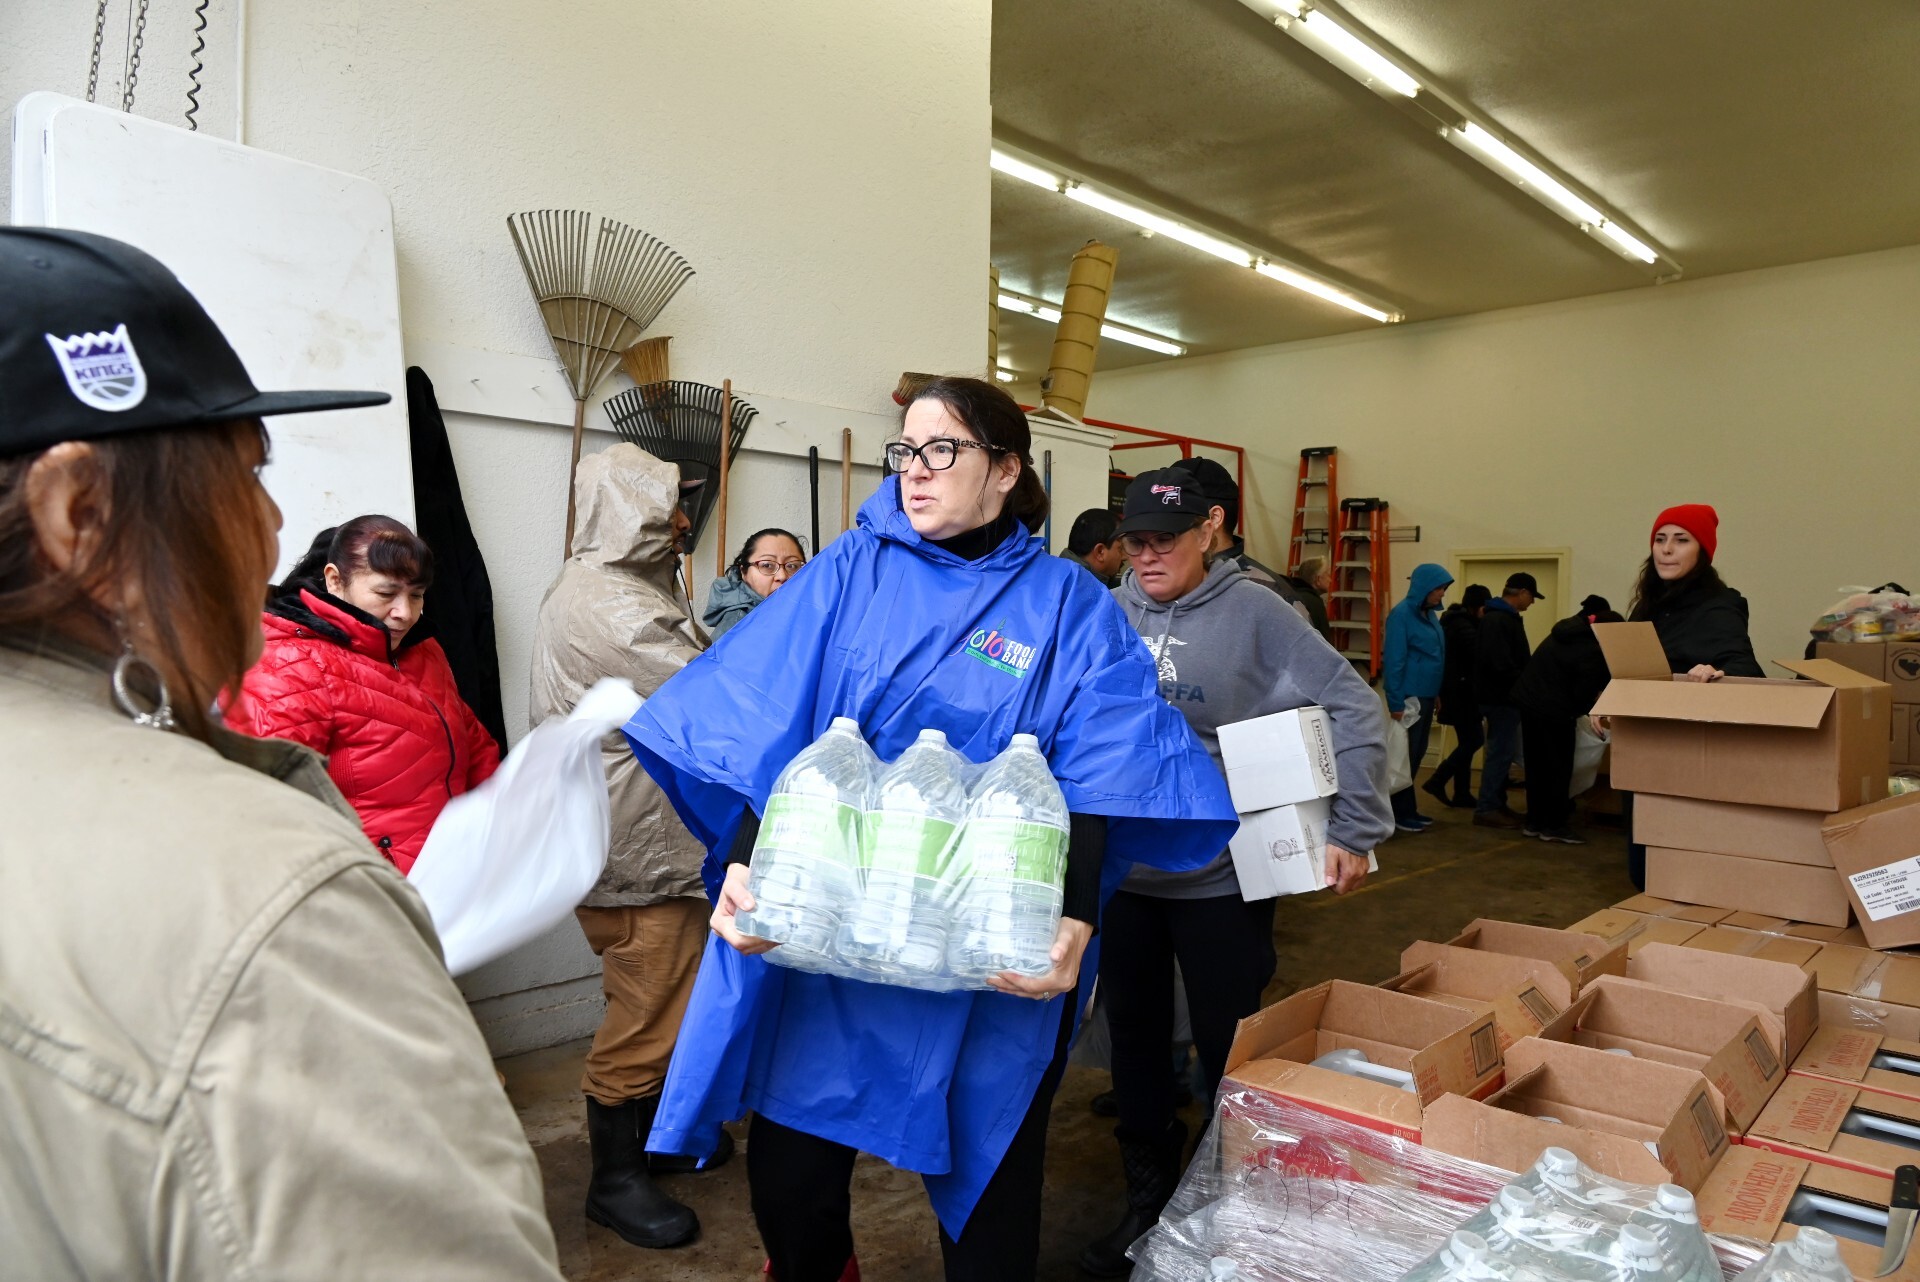 Volunteers distribute emergency food and water during severe storm event.